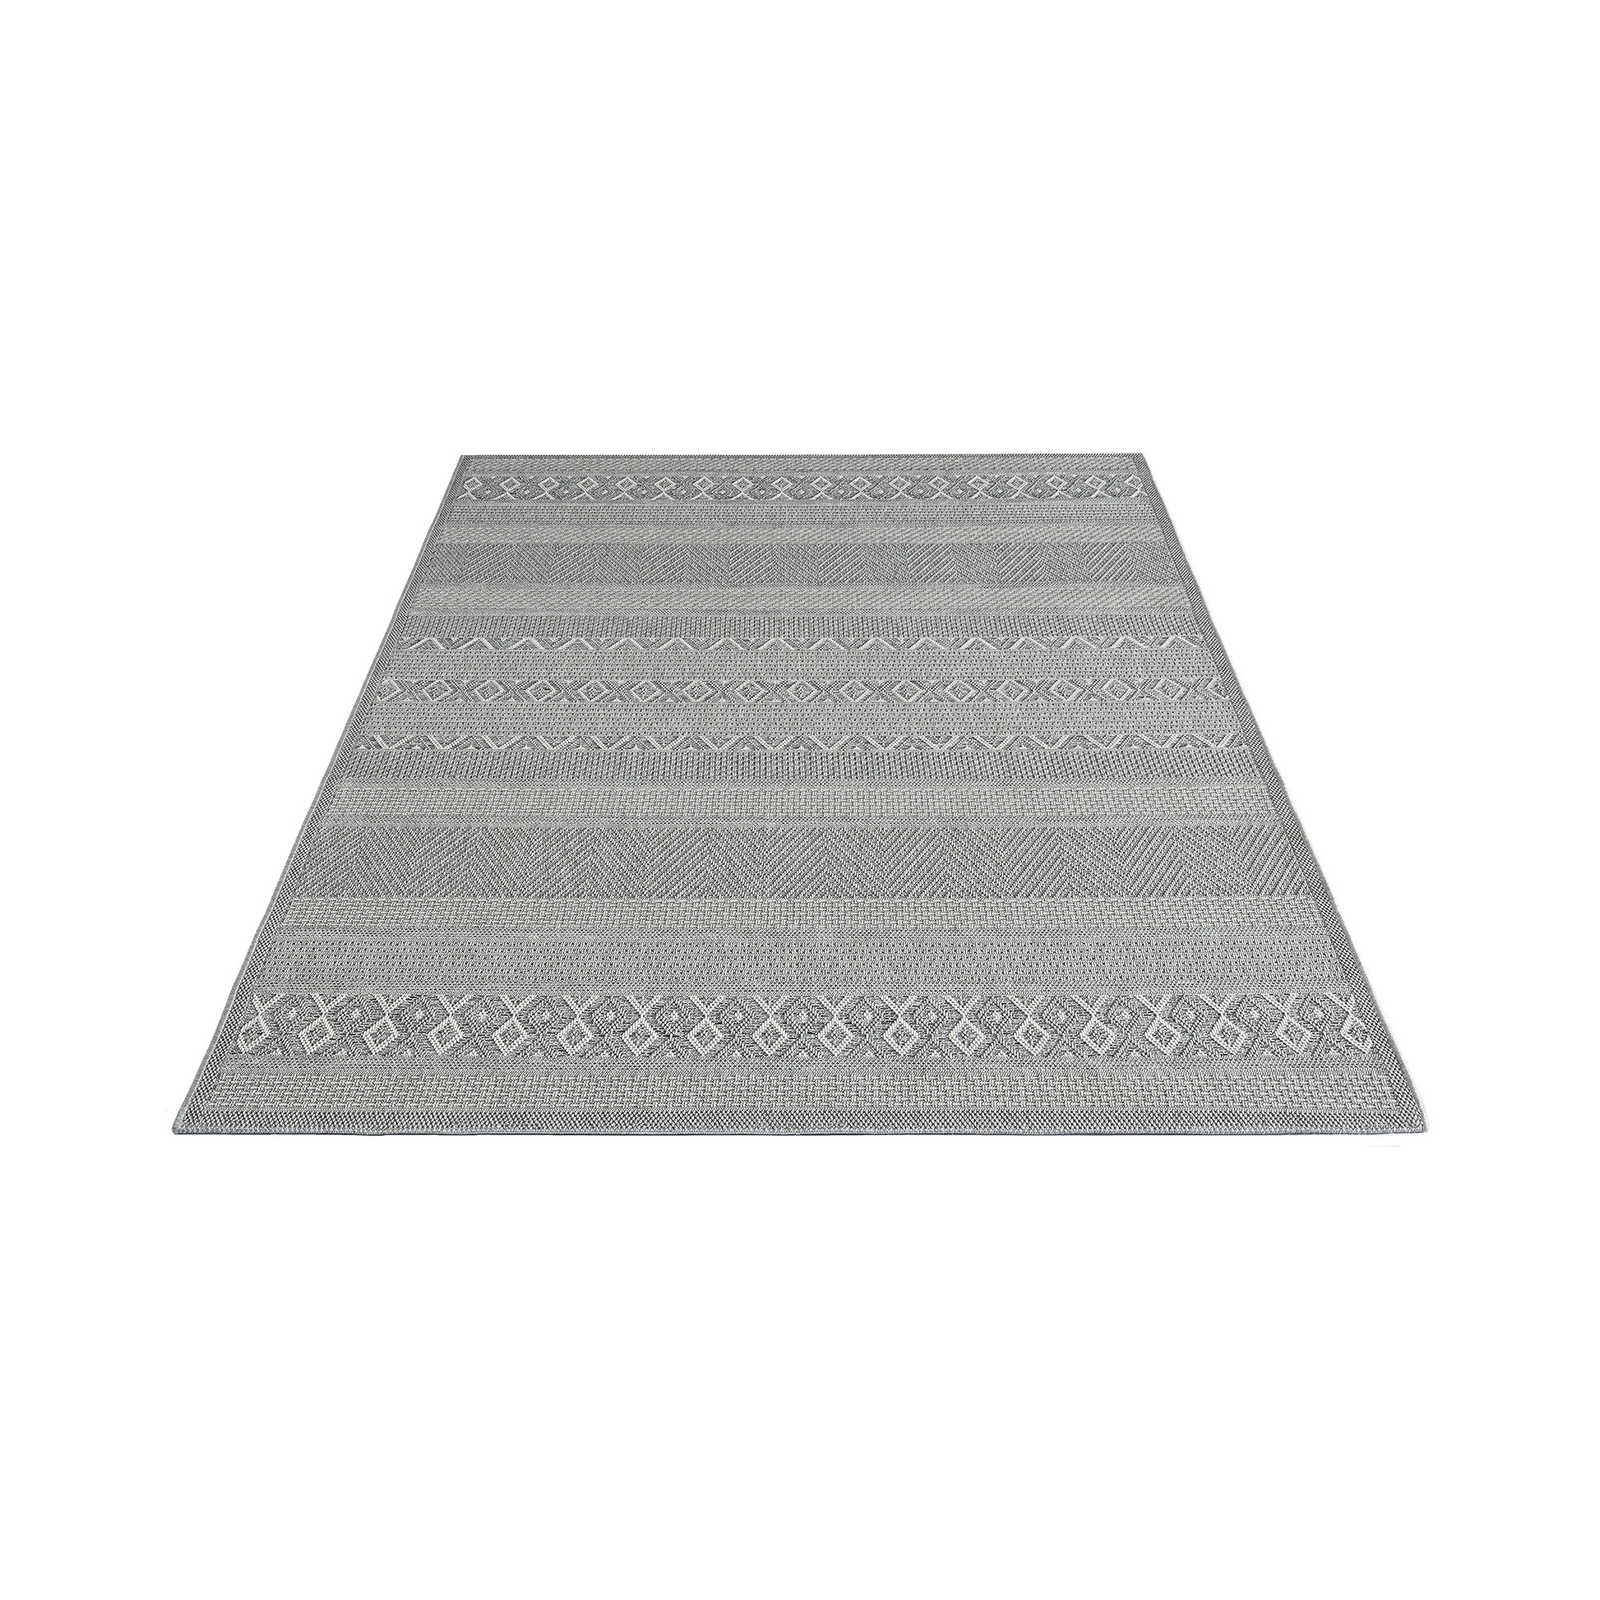 Simple Patterned Outdoor Rug in Grey - 220 x 160 cm
